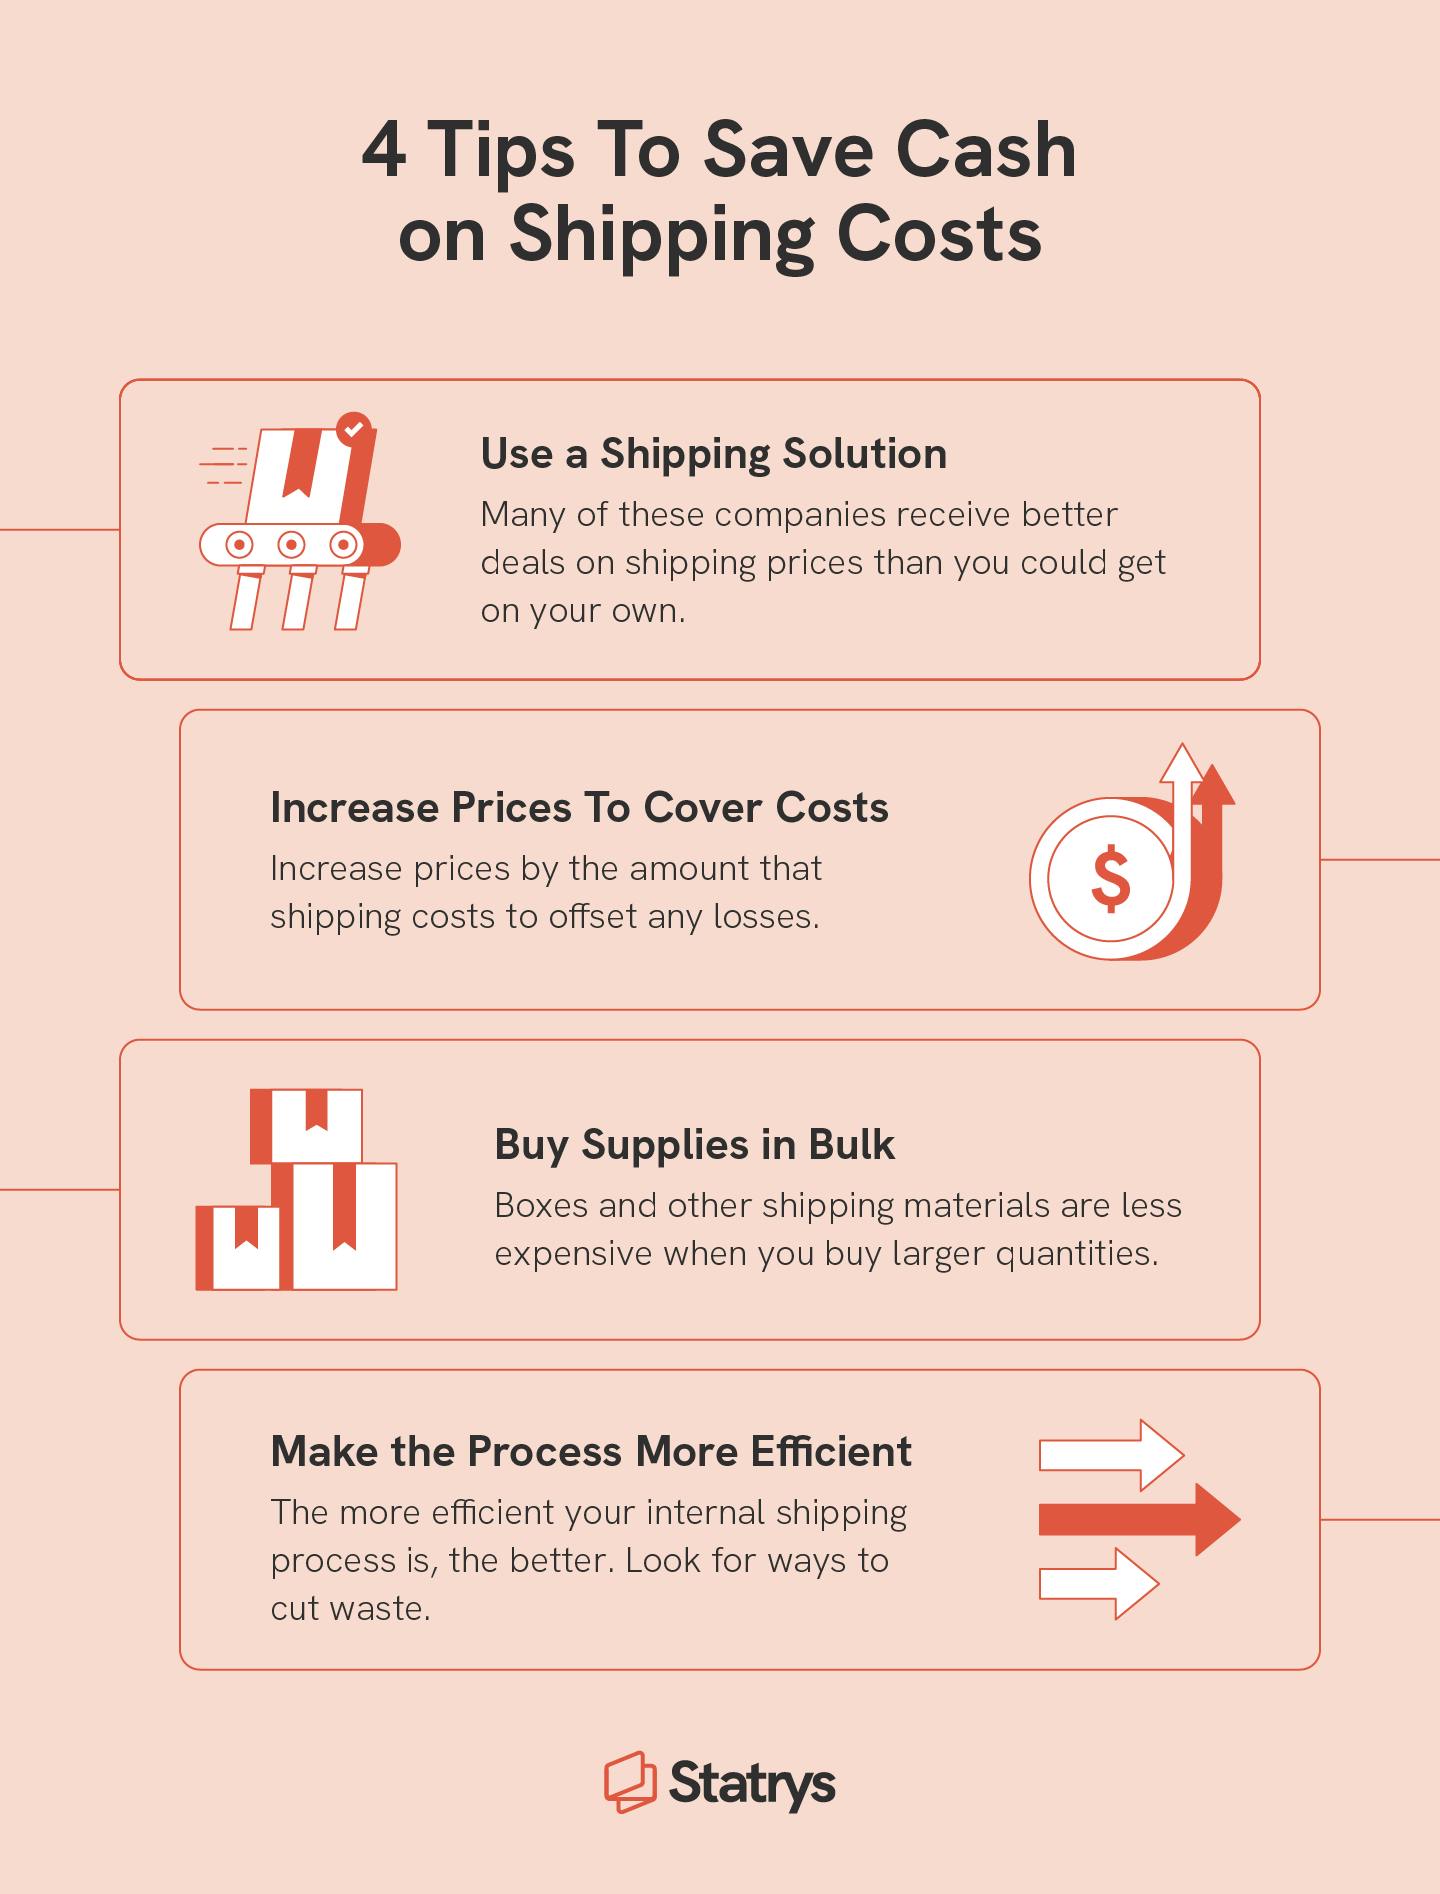 Chart featuring four sections that cover how to save money during the ecommerce shipping process, including using shipping solutions, increasing prices, buying supplies in bulk, and making the process more efficient.